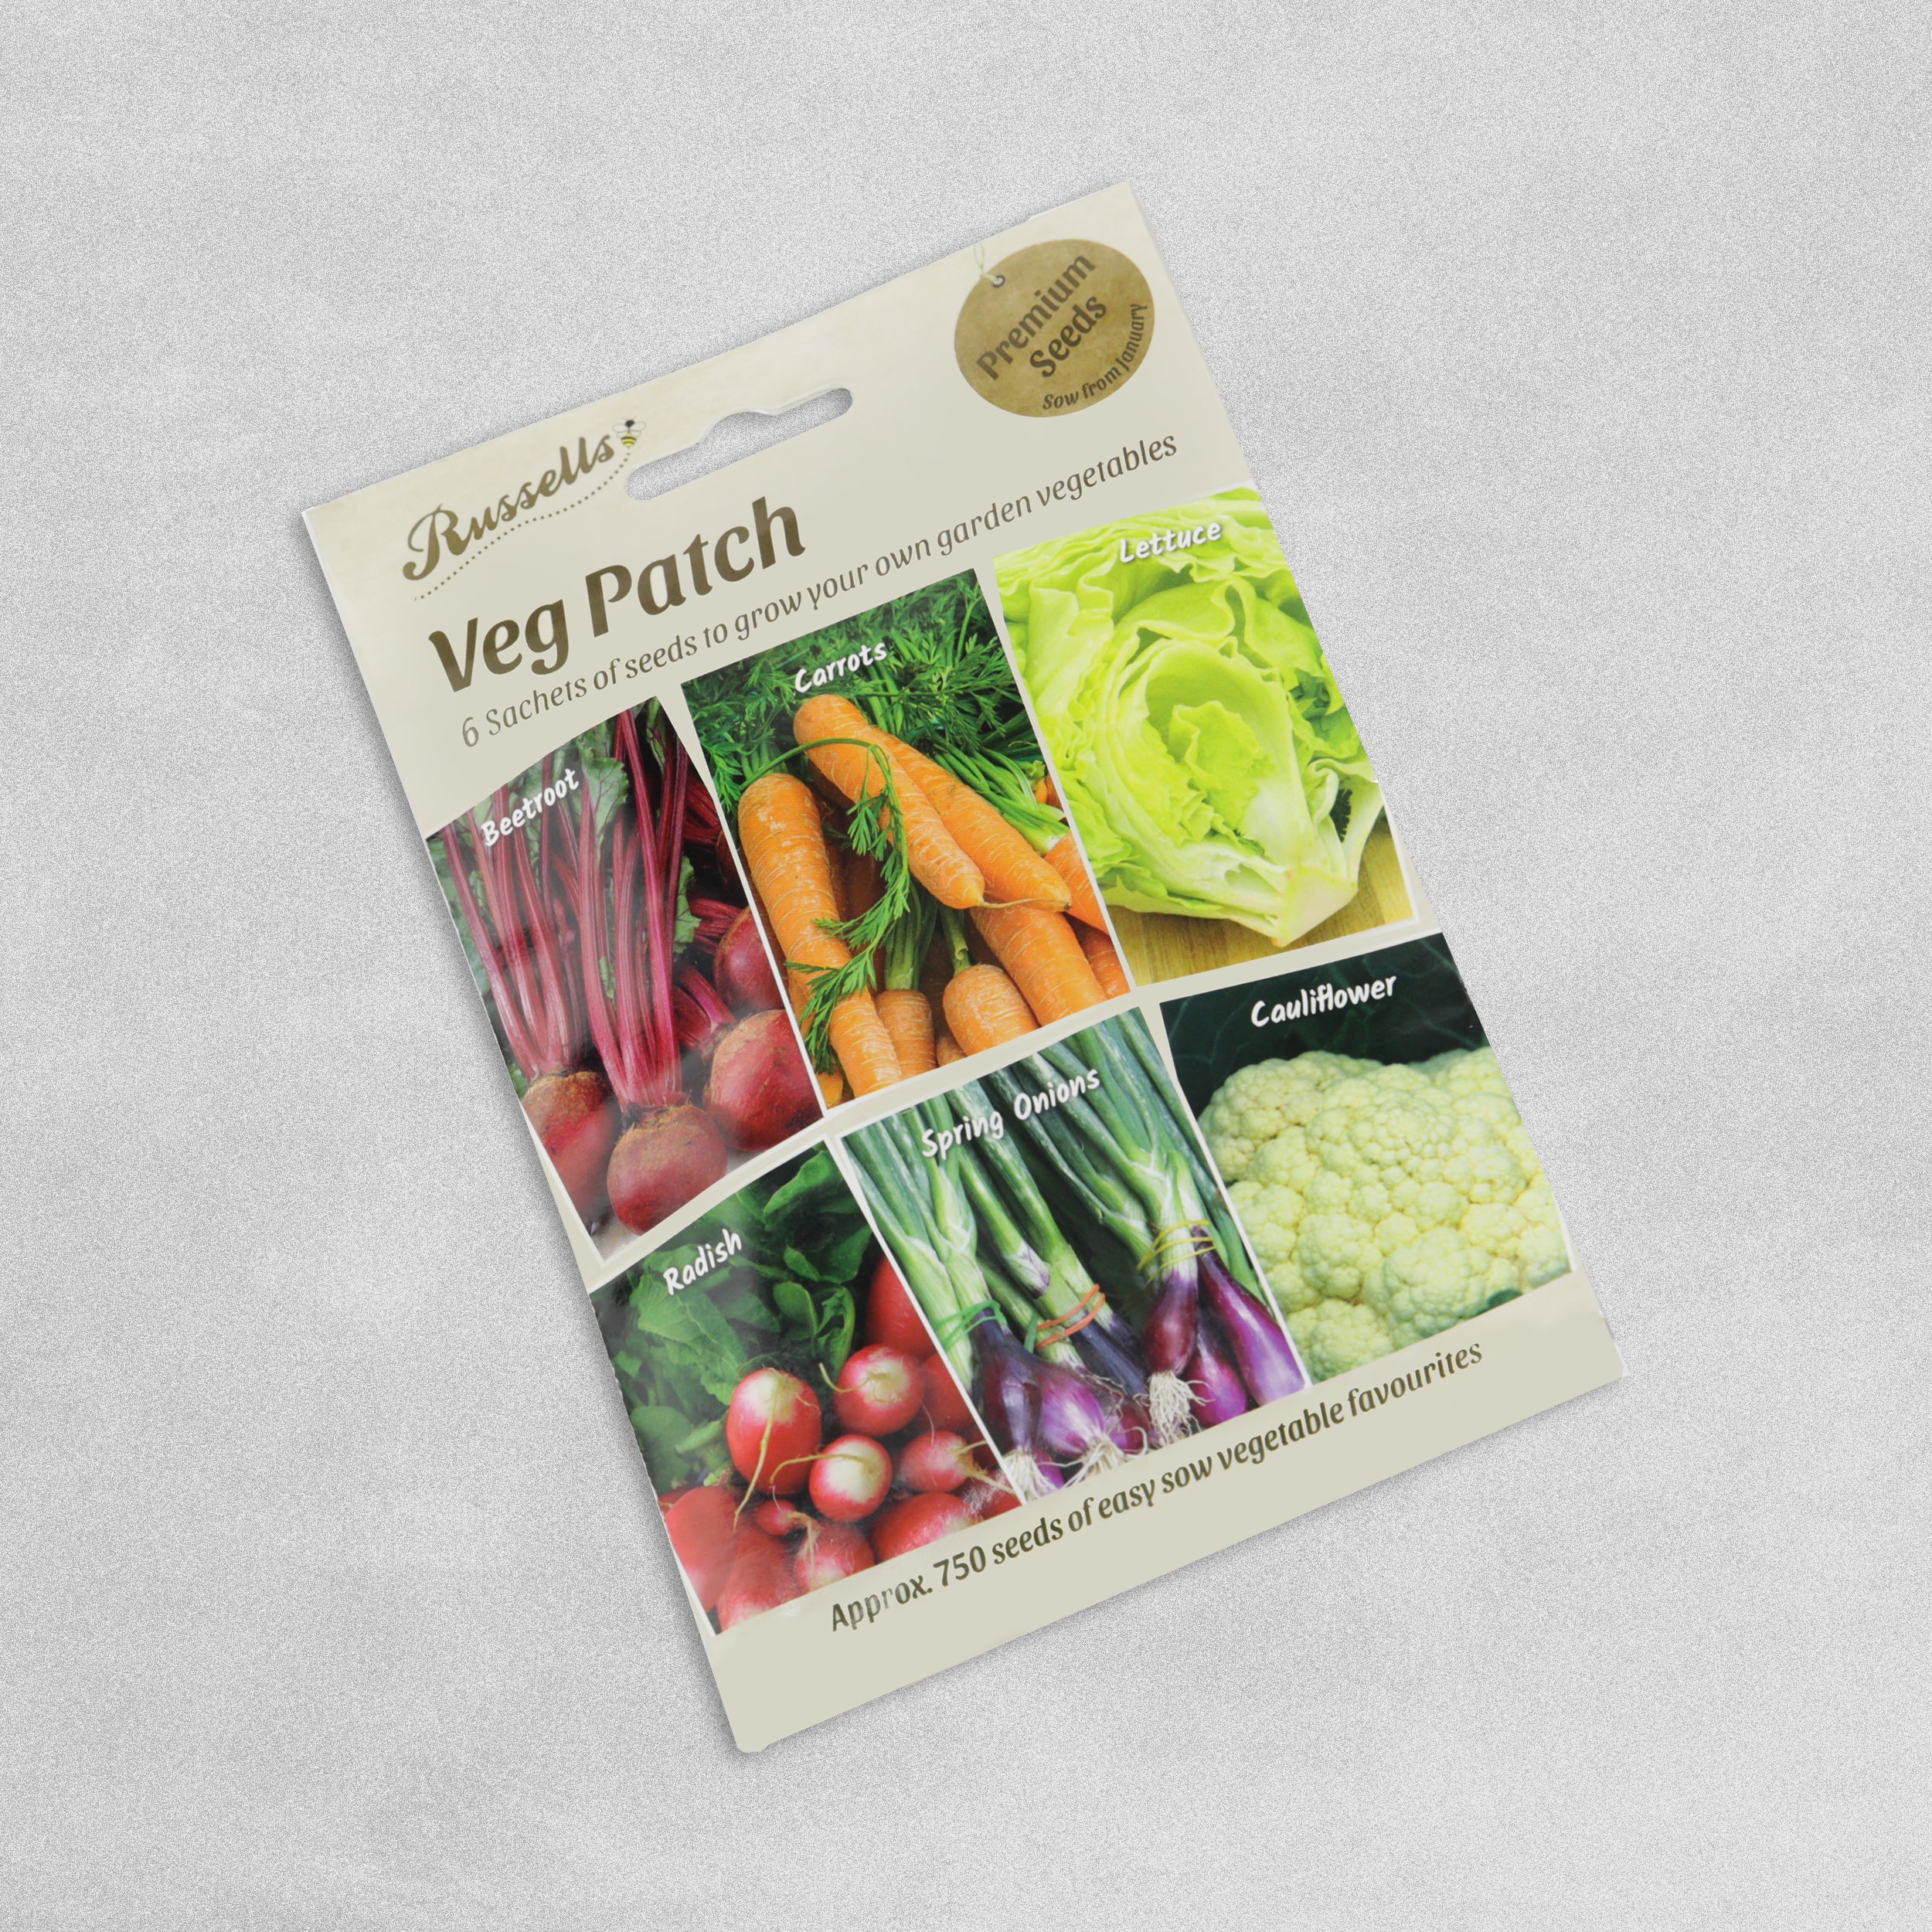 Russels Veg Patch 6 pack of Seeds